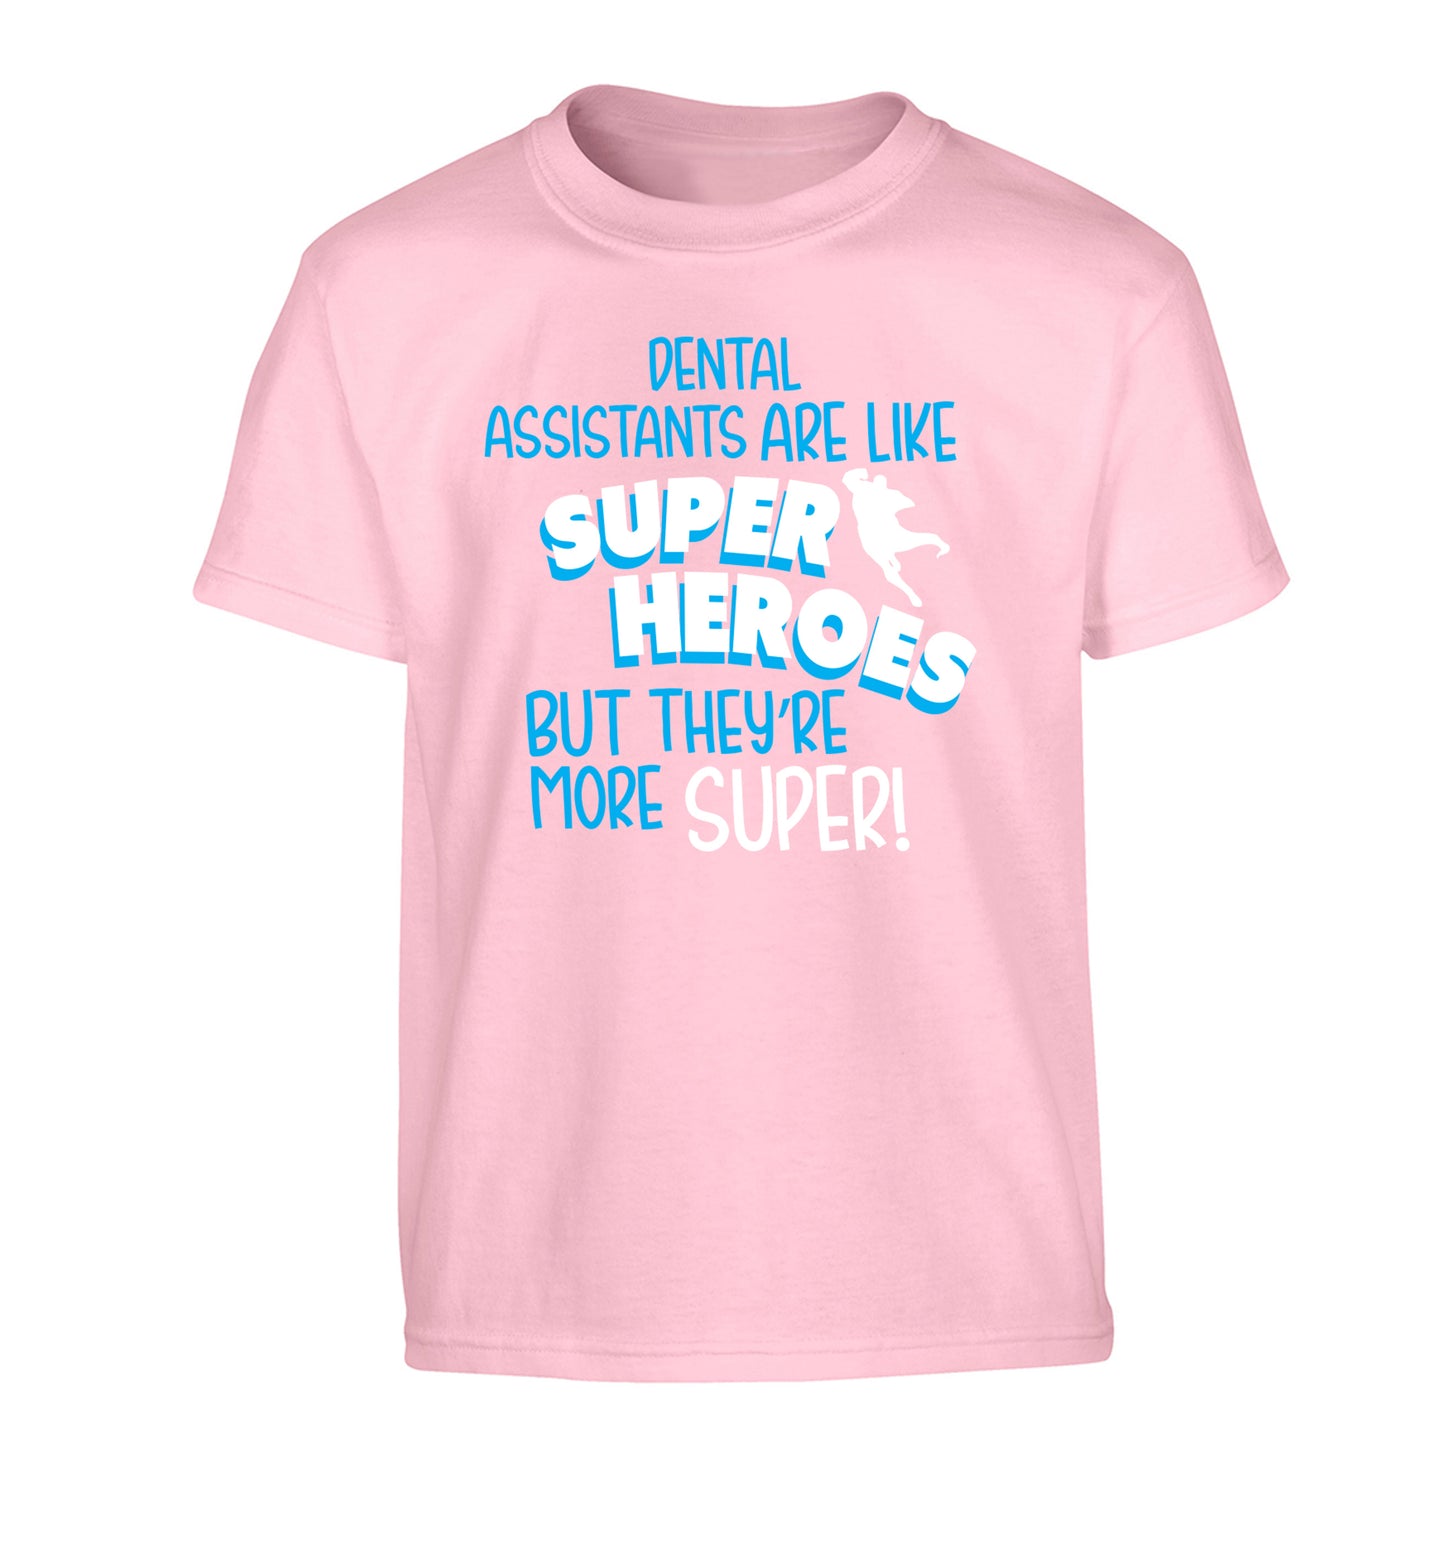 Dental Assistants are like superheros but they're more super Children's light pink Tshirt 12-13 Years